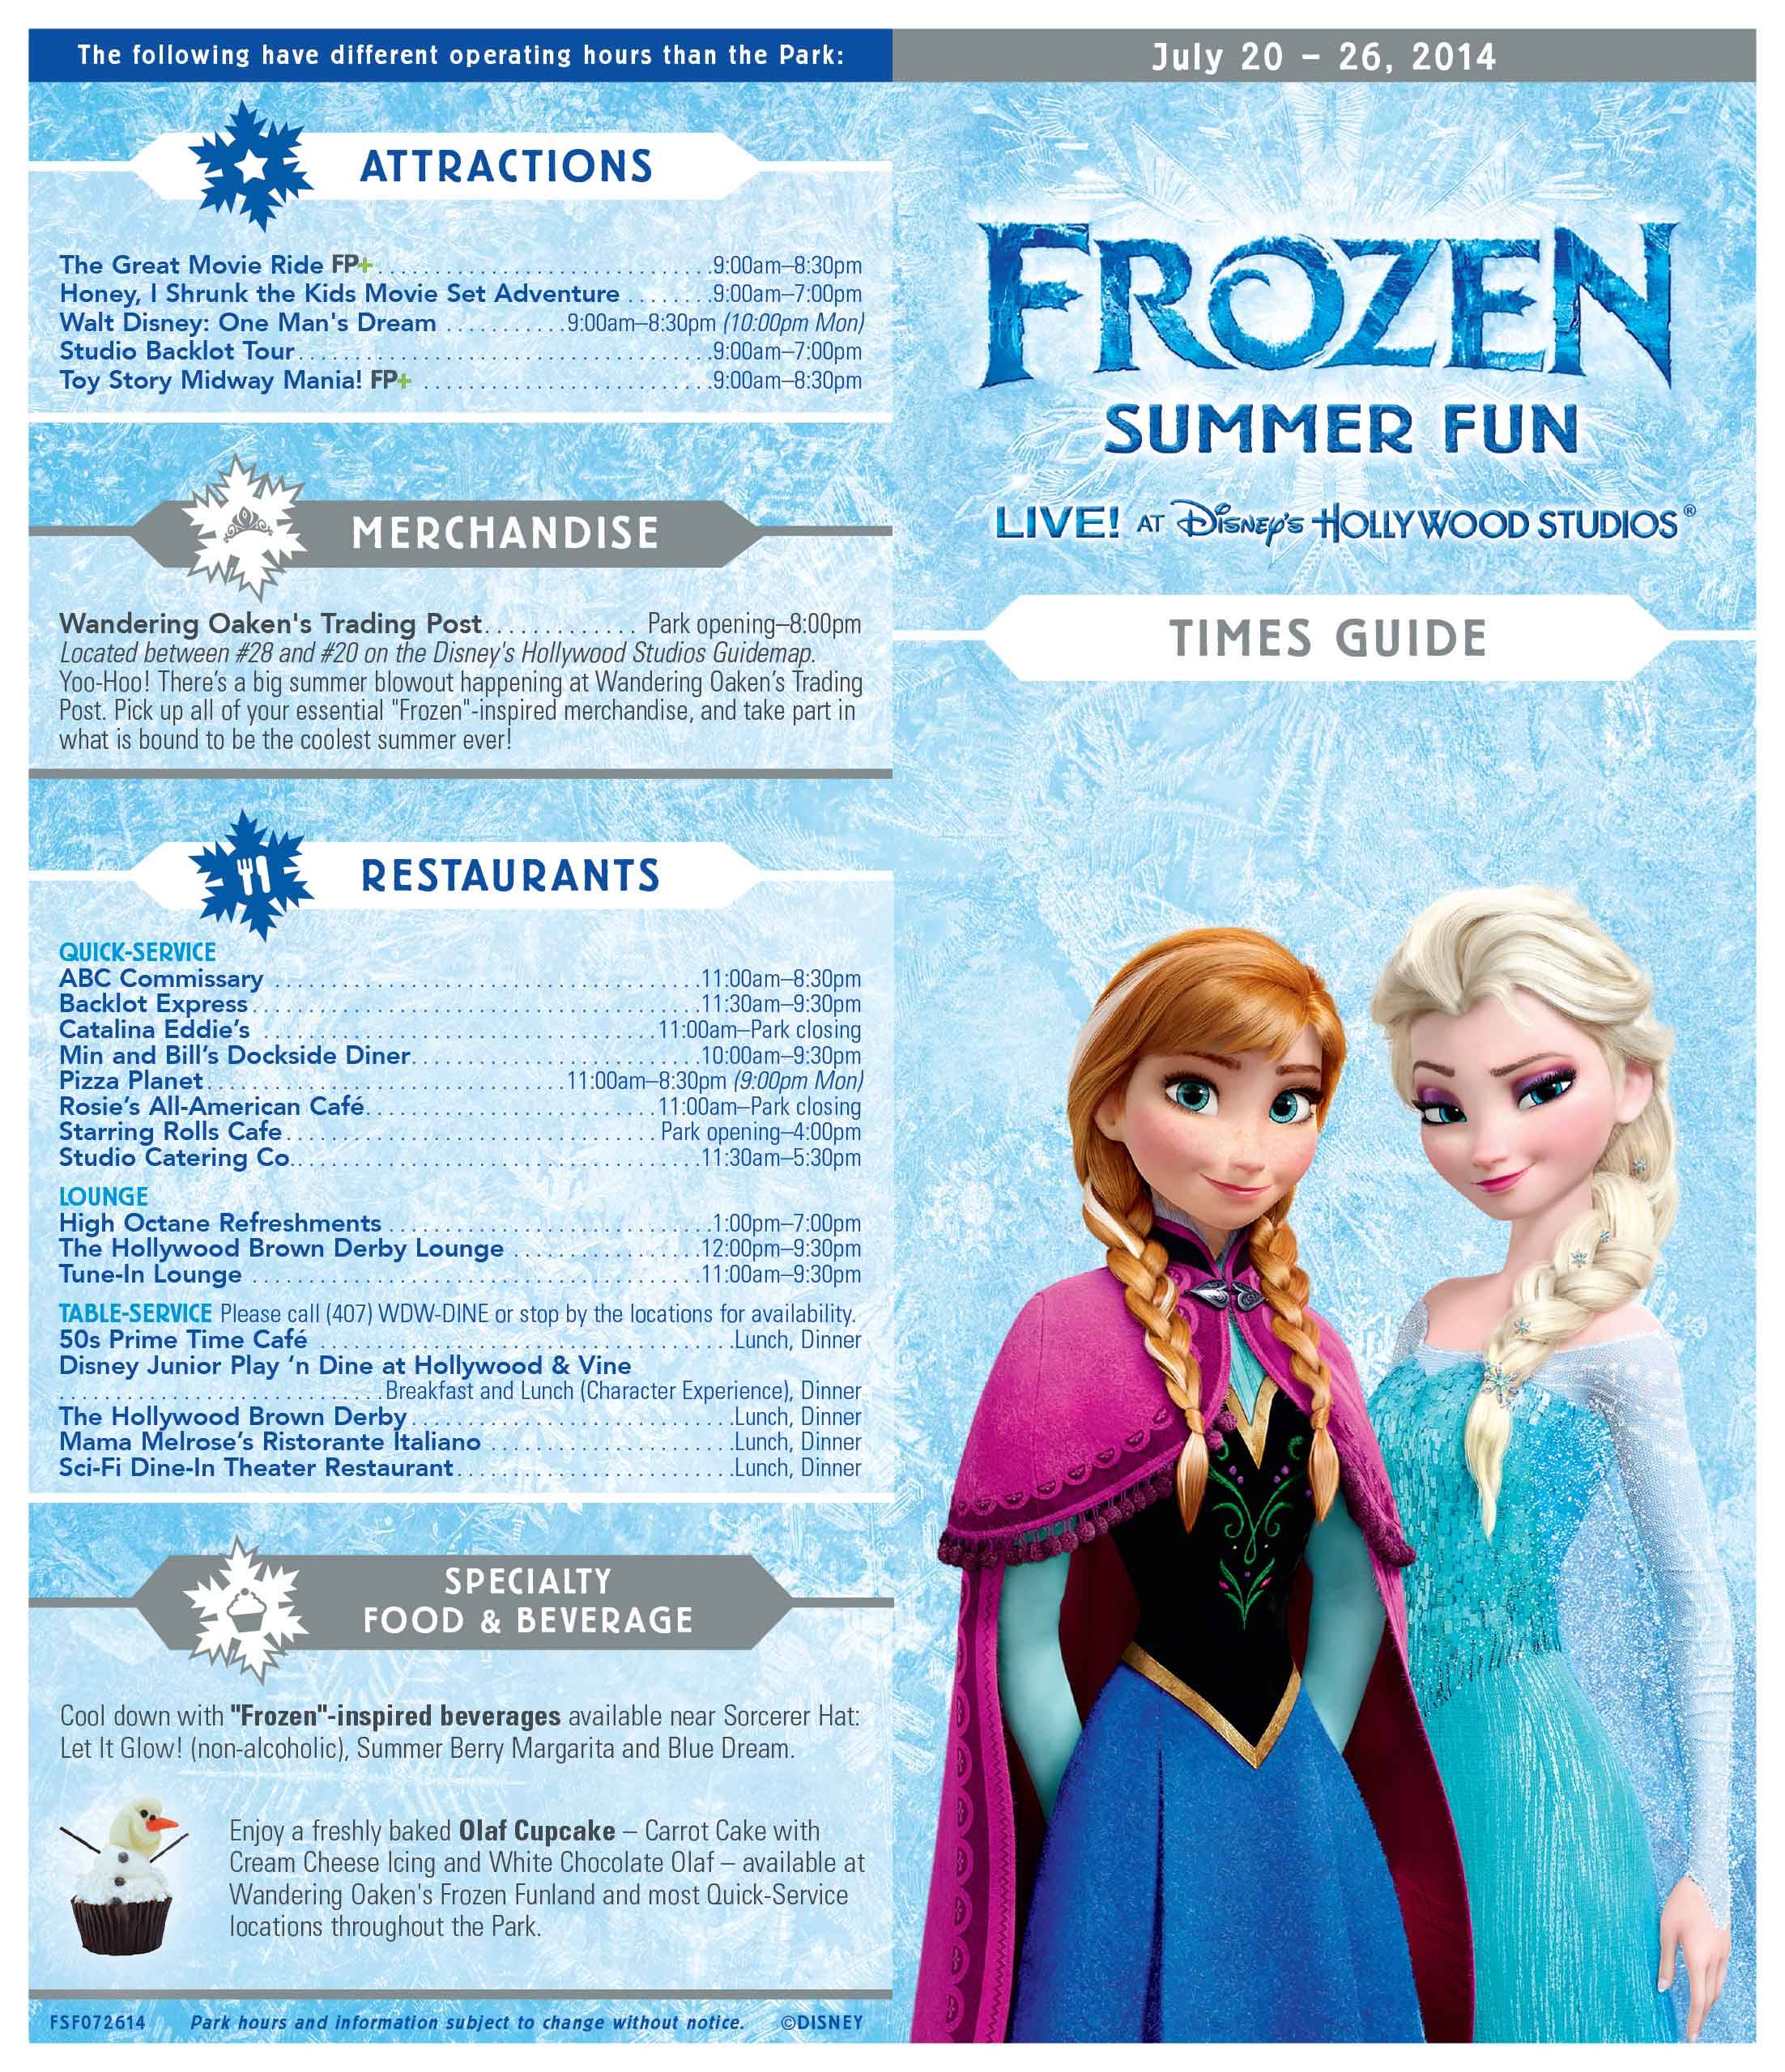 Frozen Summer Fun - LIVE at Disney's Hollywood Studios time guide front